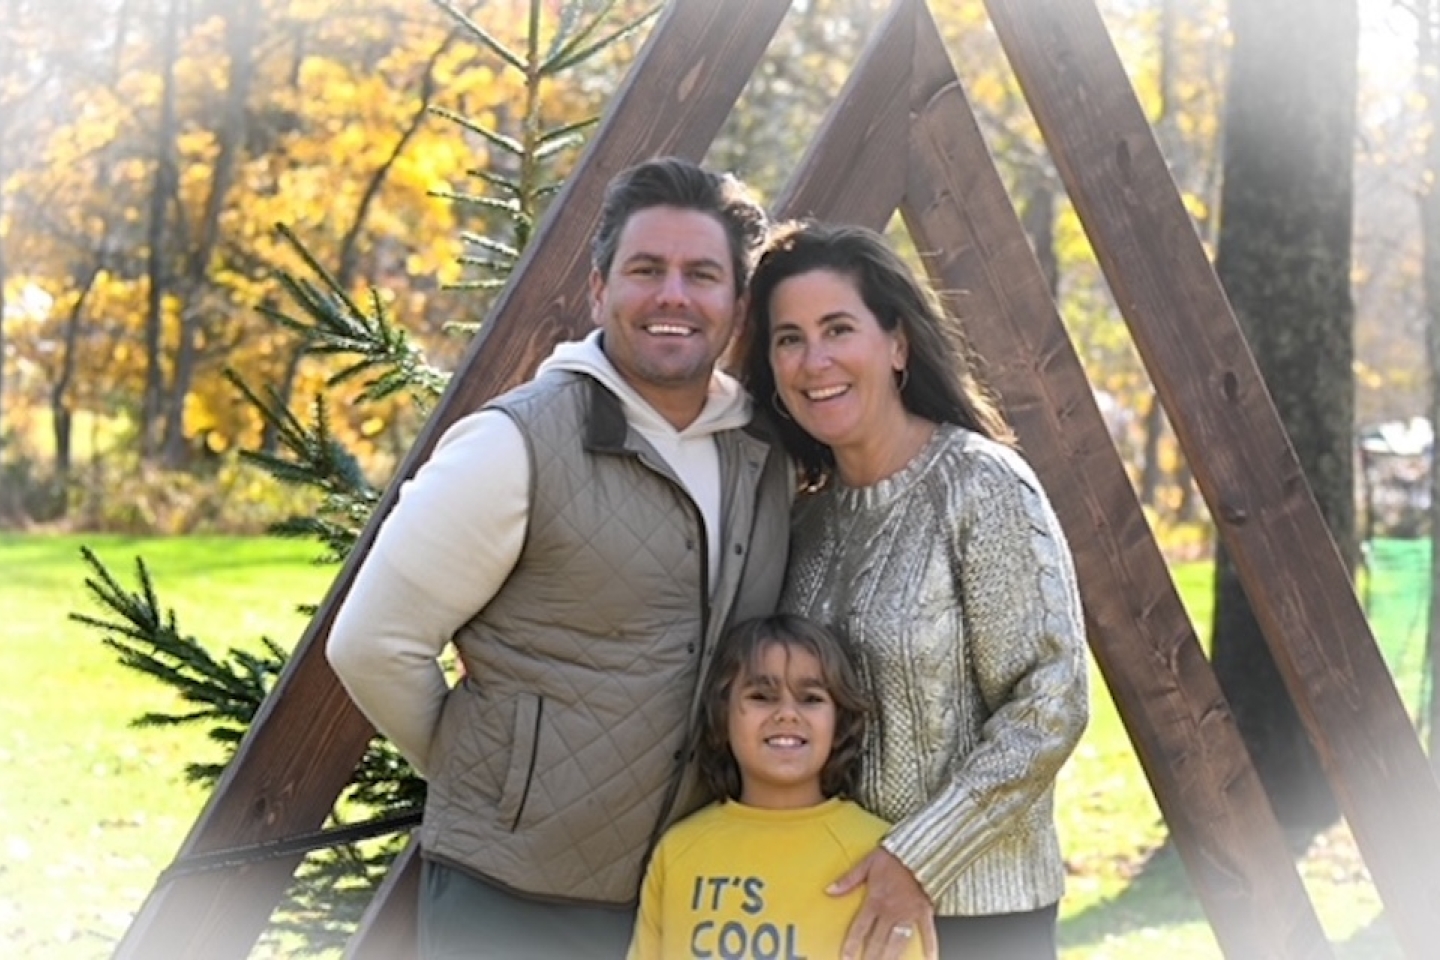 Laila, her husband, and her son, Luke in present day